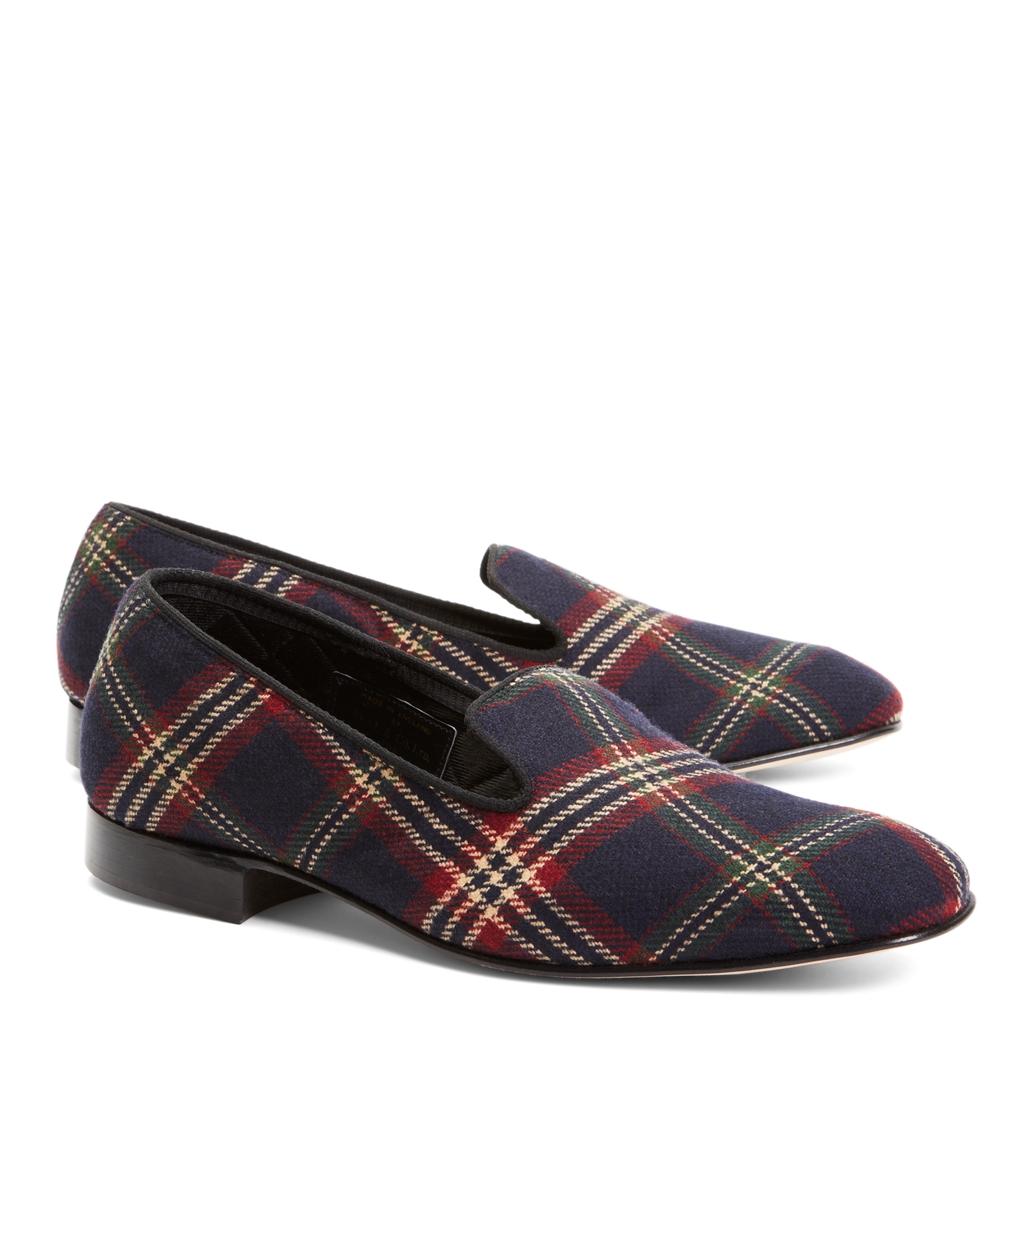 Lyst - Brooks Brothers Signature Tartan Wool Slippers in Blue for Men